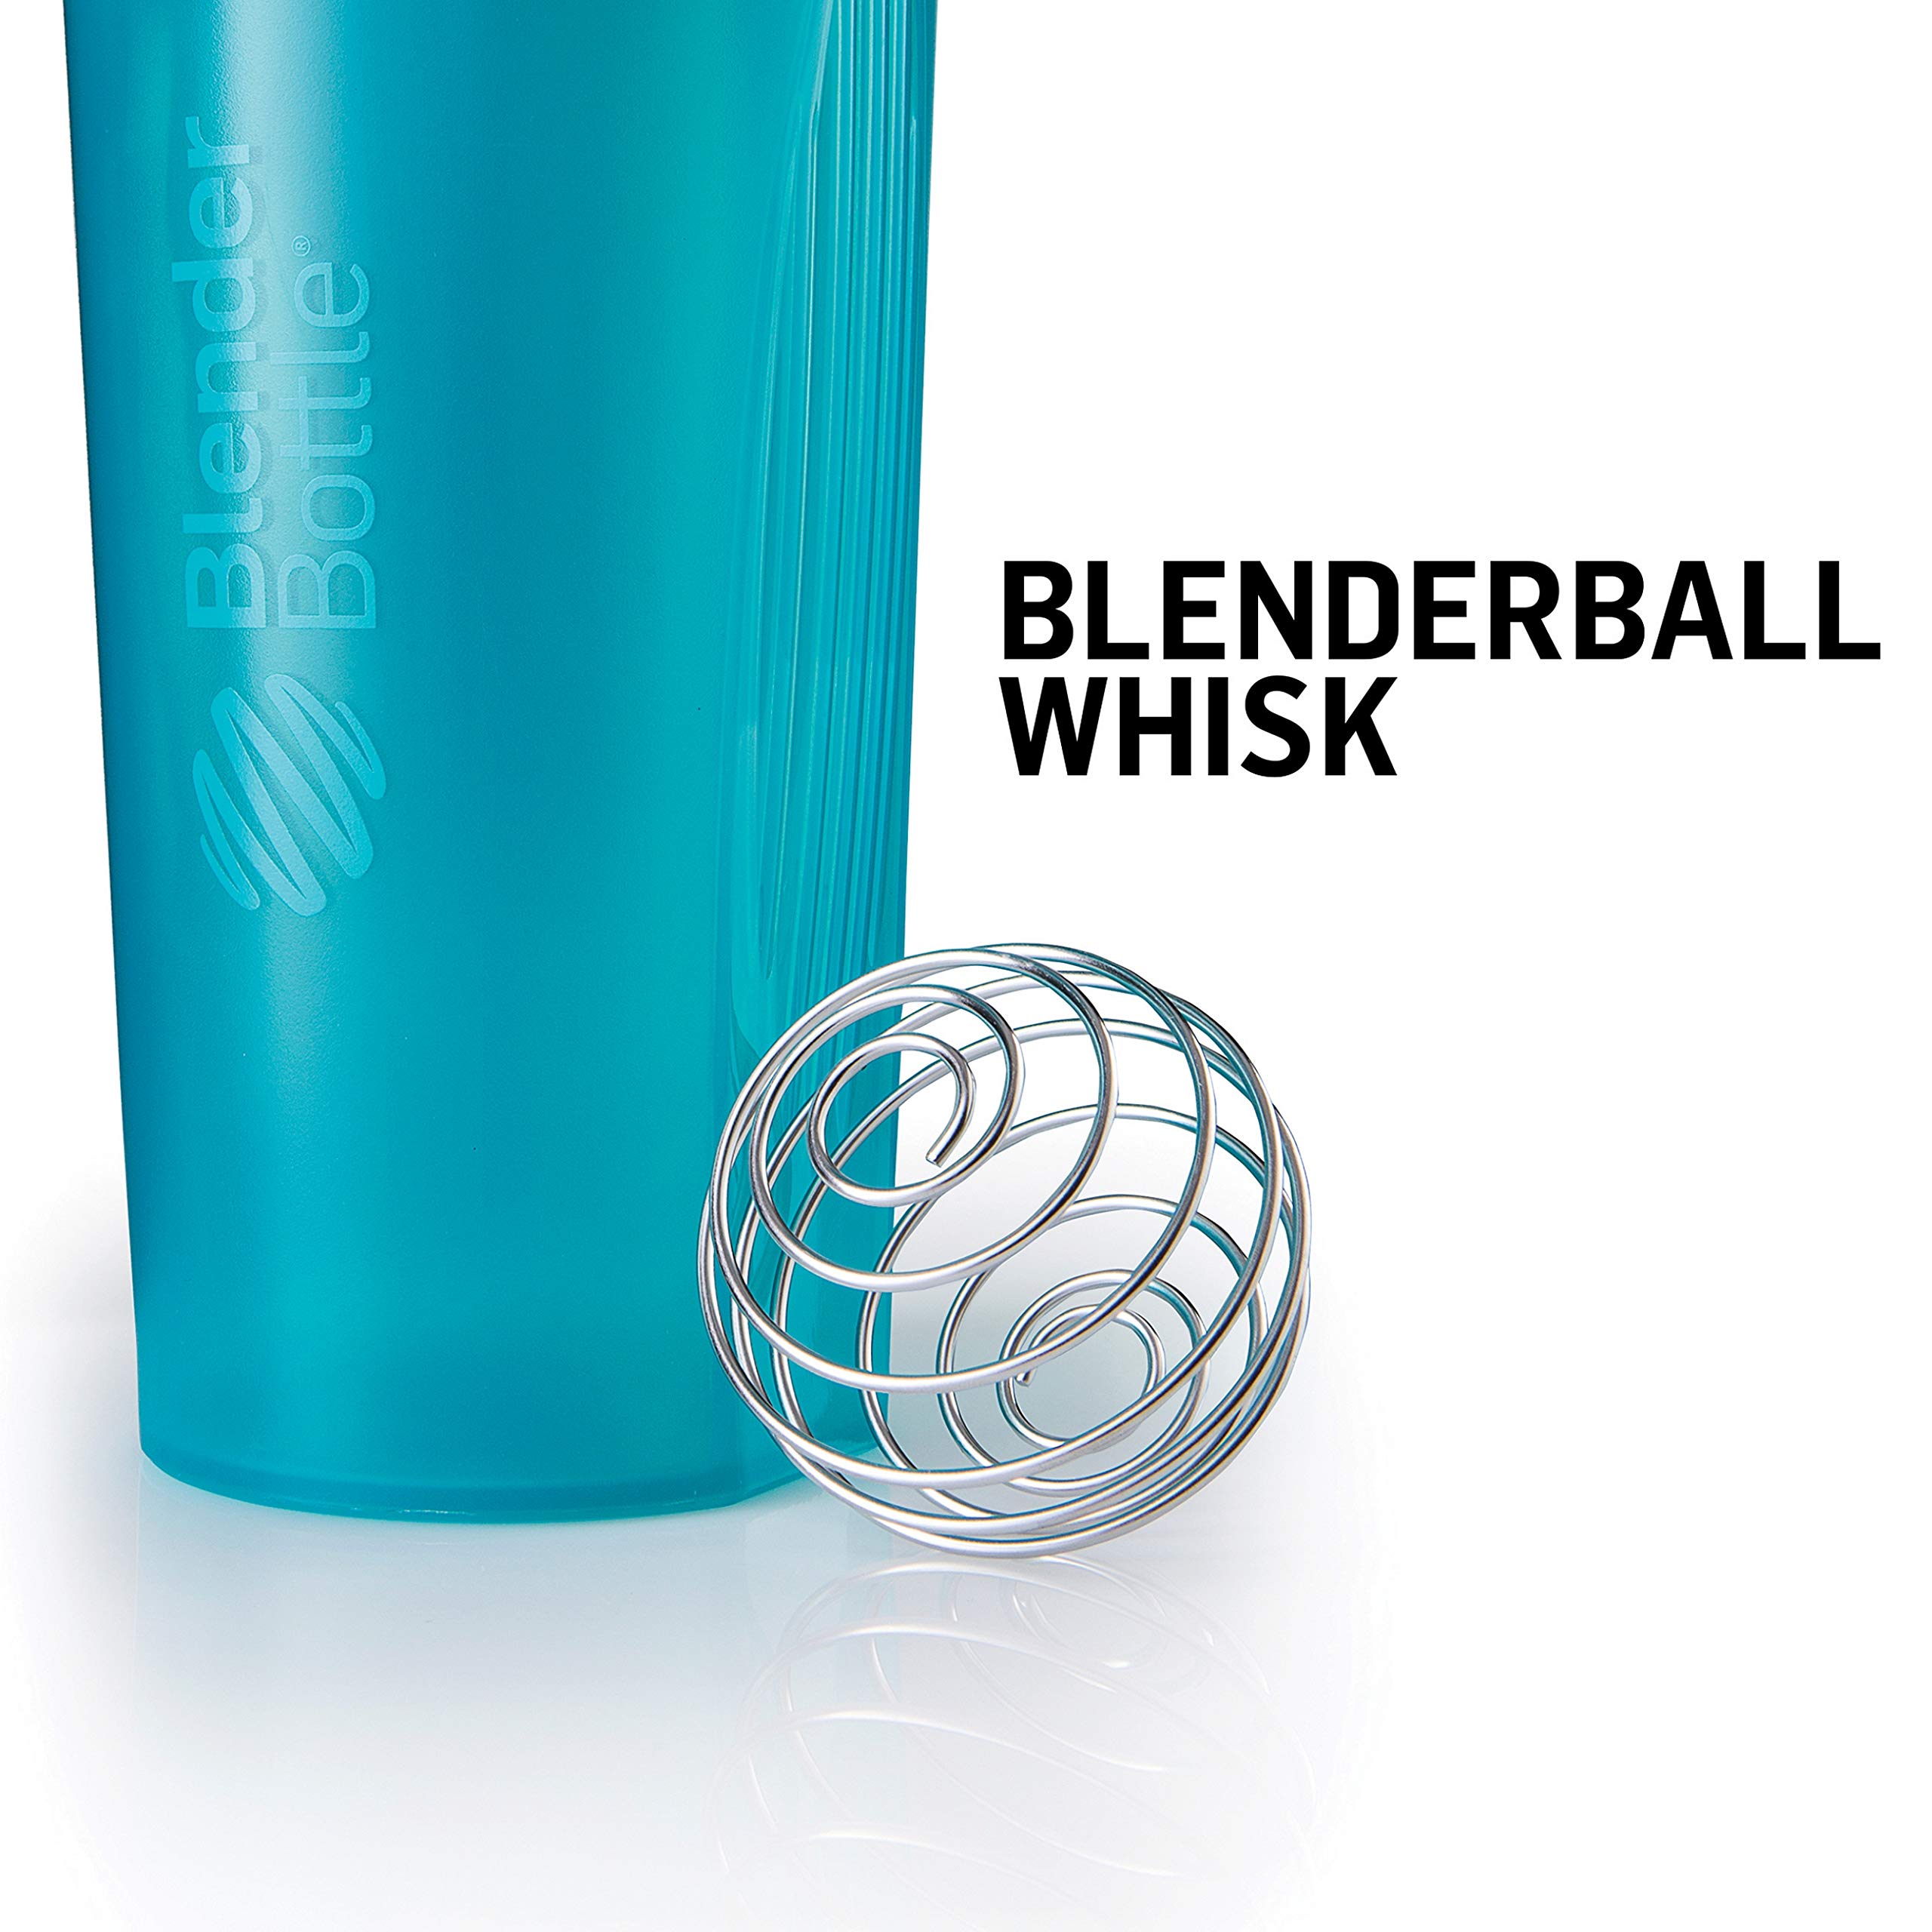 BlenderBottle Classic Shaker Bottle Perfect for Protein Shakes and Pre Workout, 28-Ounce, Cyan